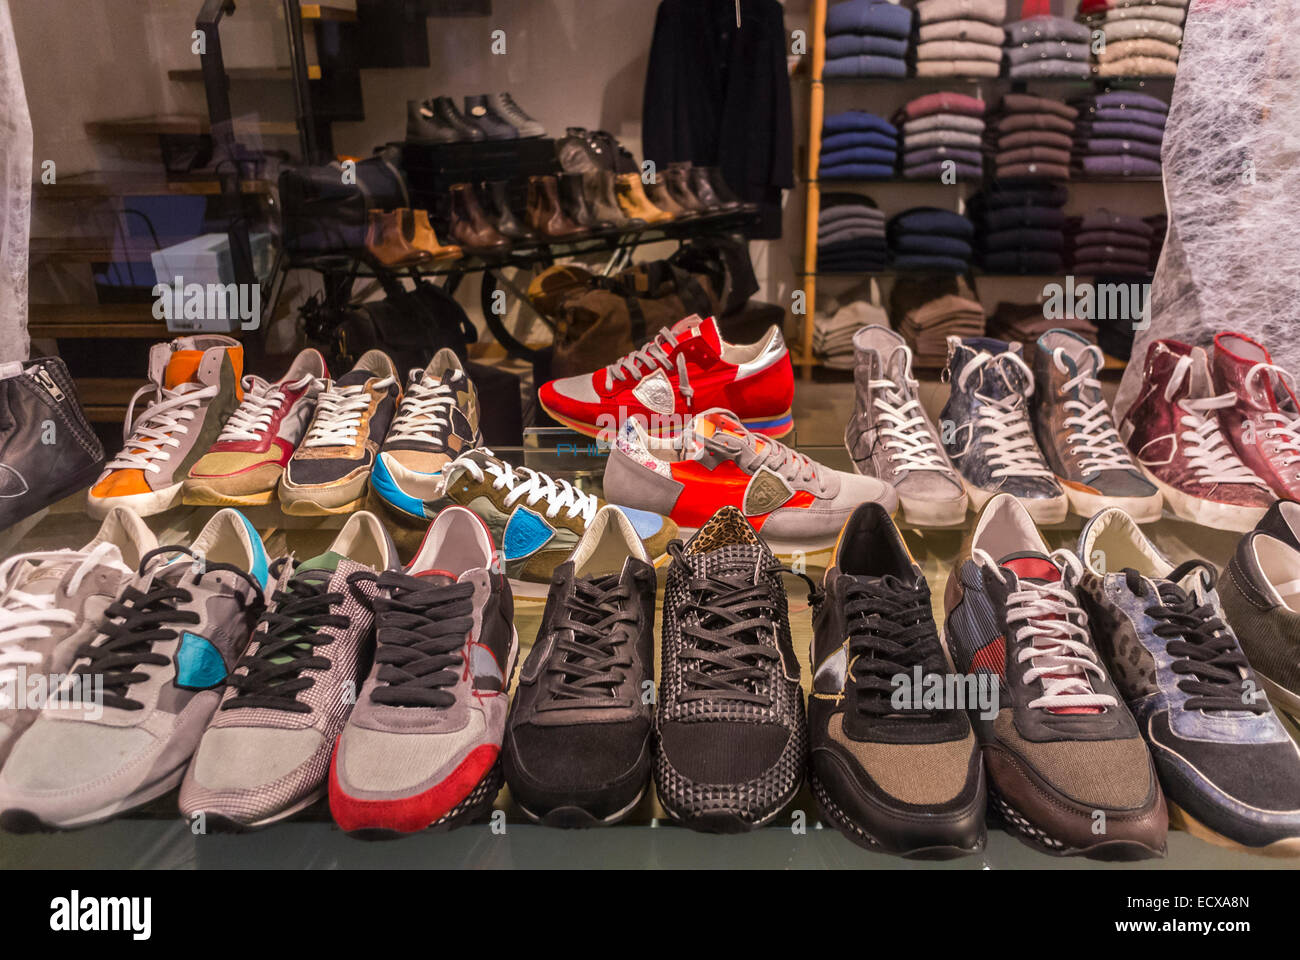 Upmarket Shoes High Resolution Stock Photography and Images - Alamy